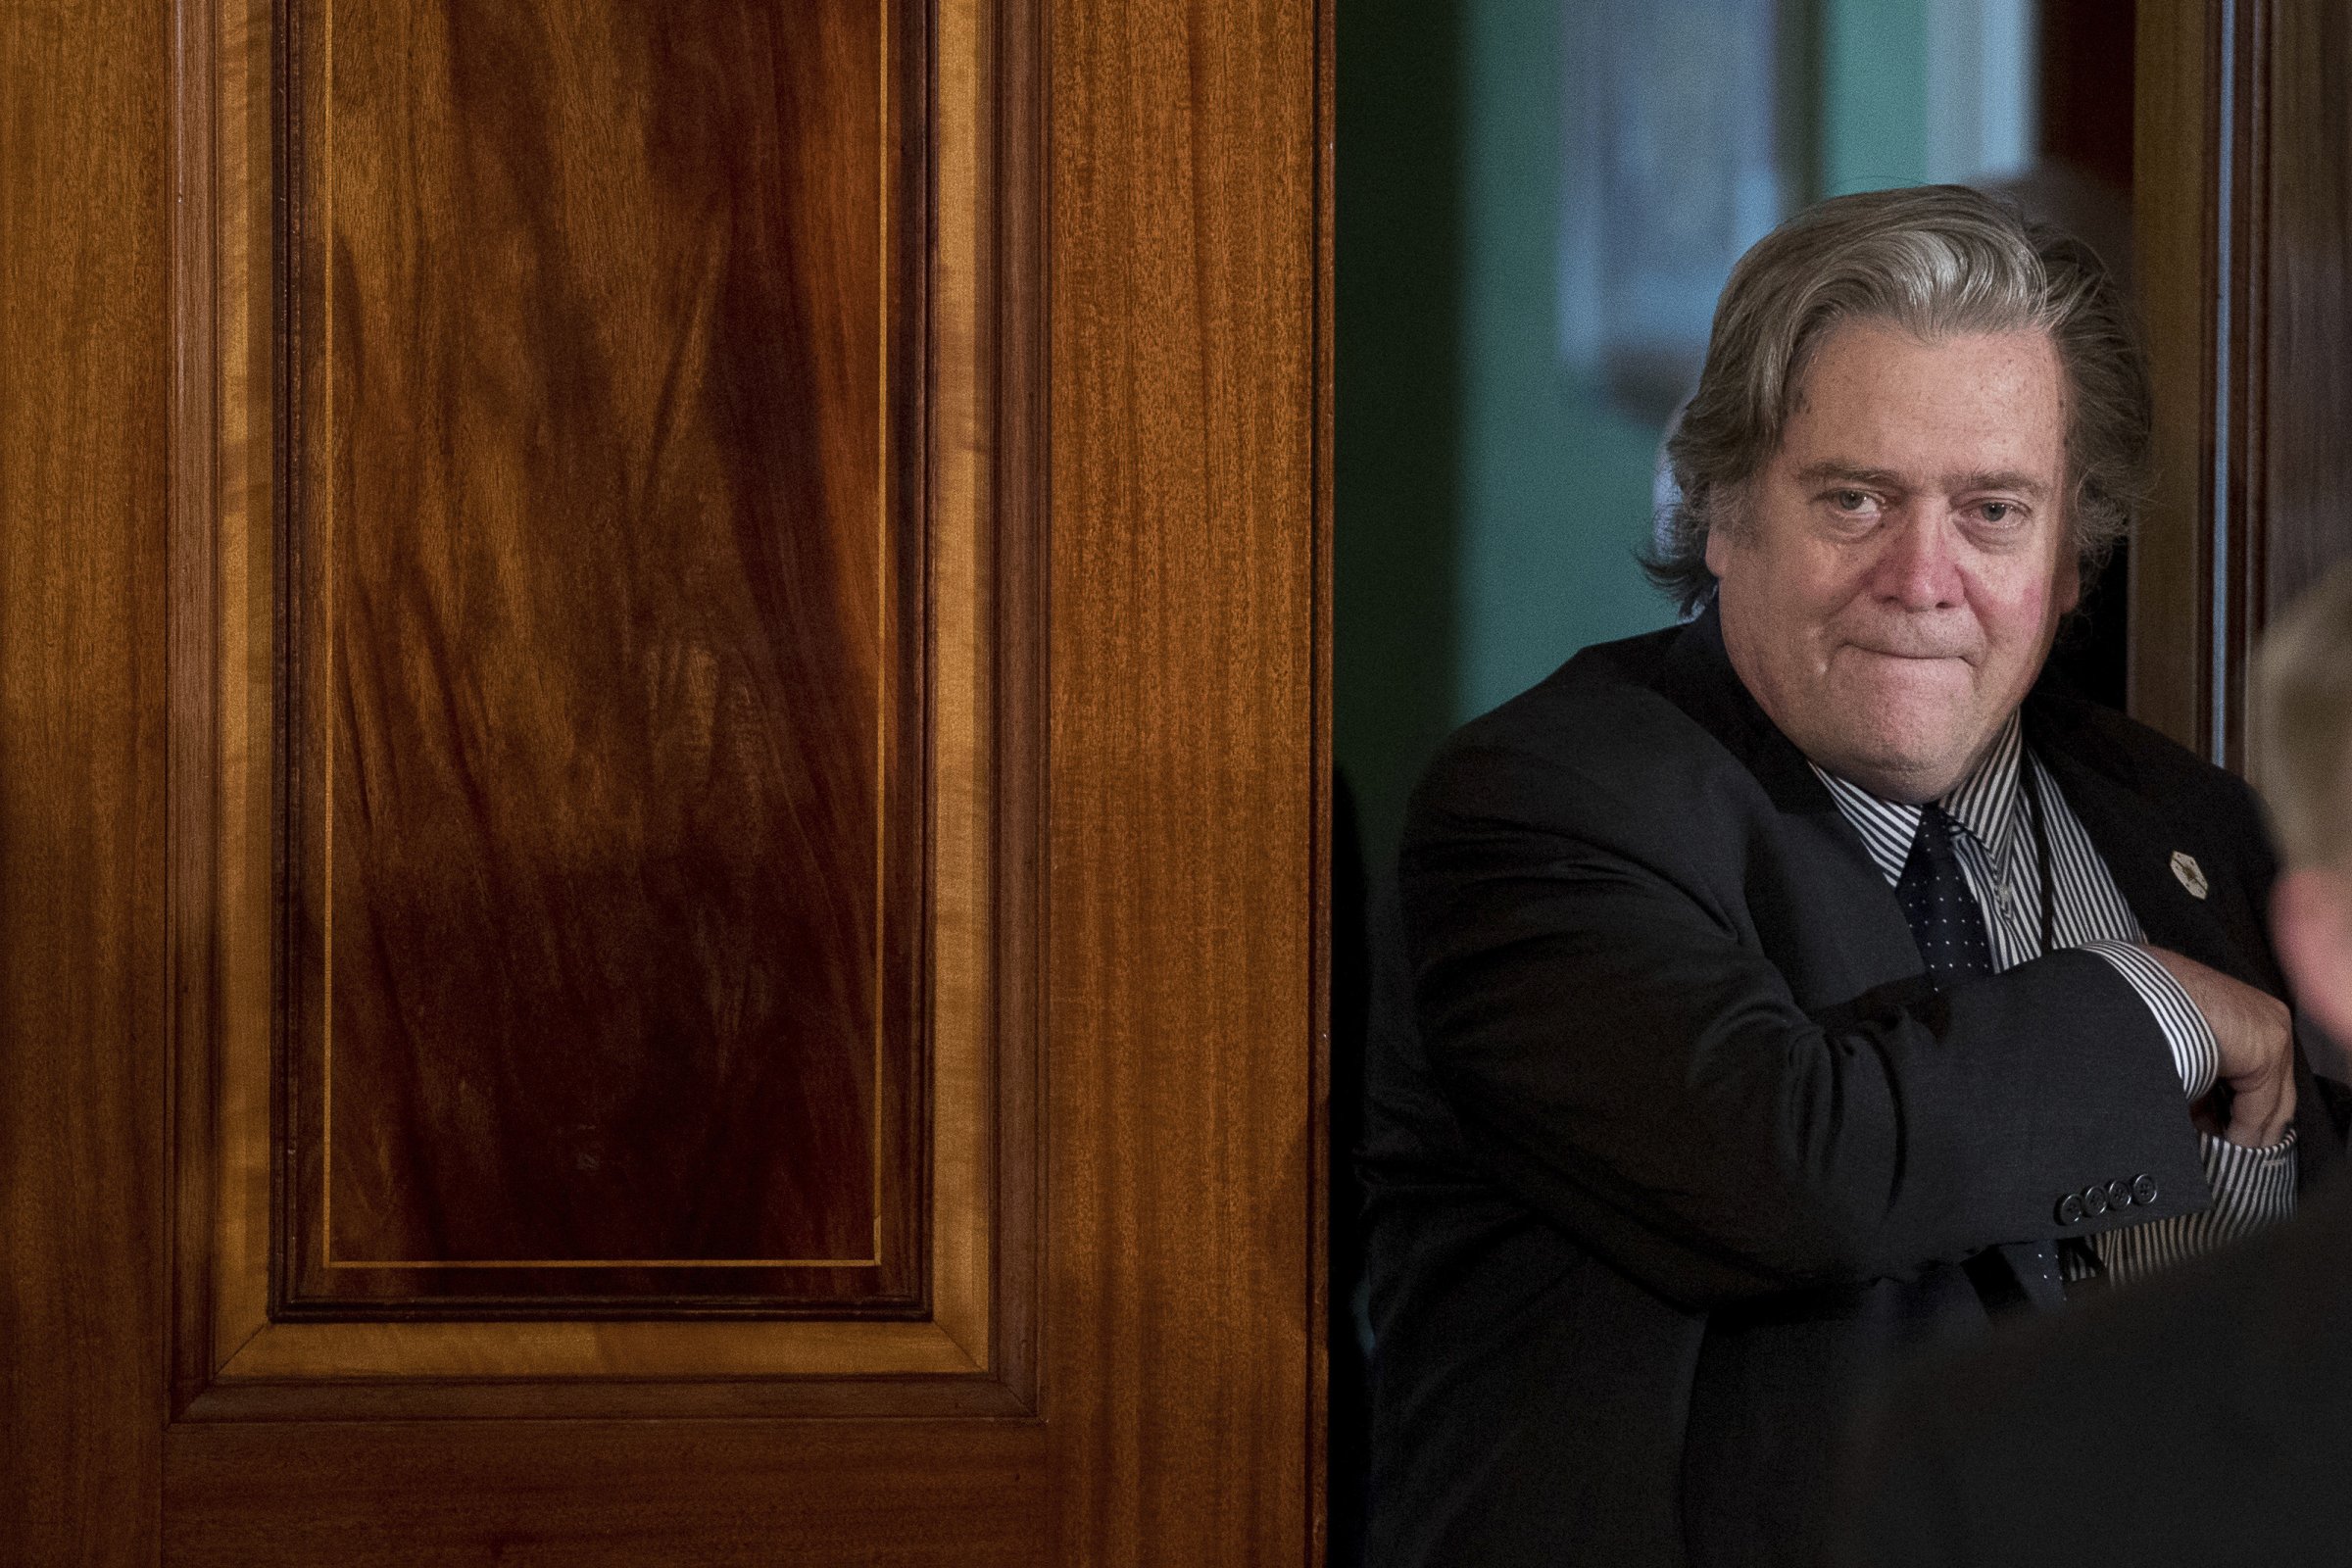 Bannon Exit Won’t End White House Chaos That Comes From the Top